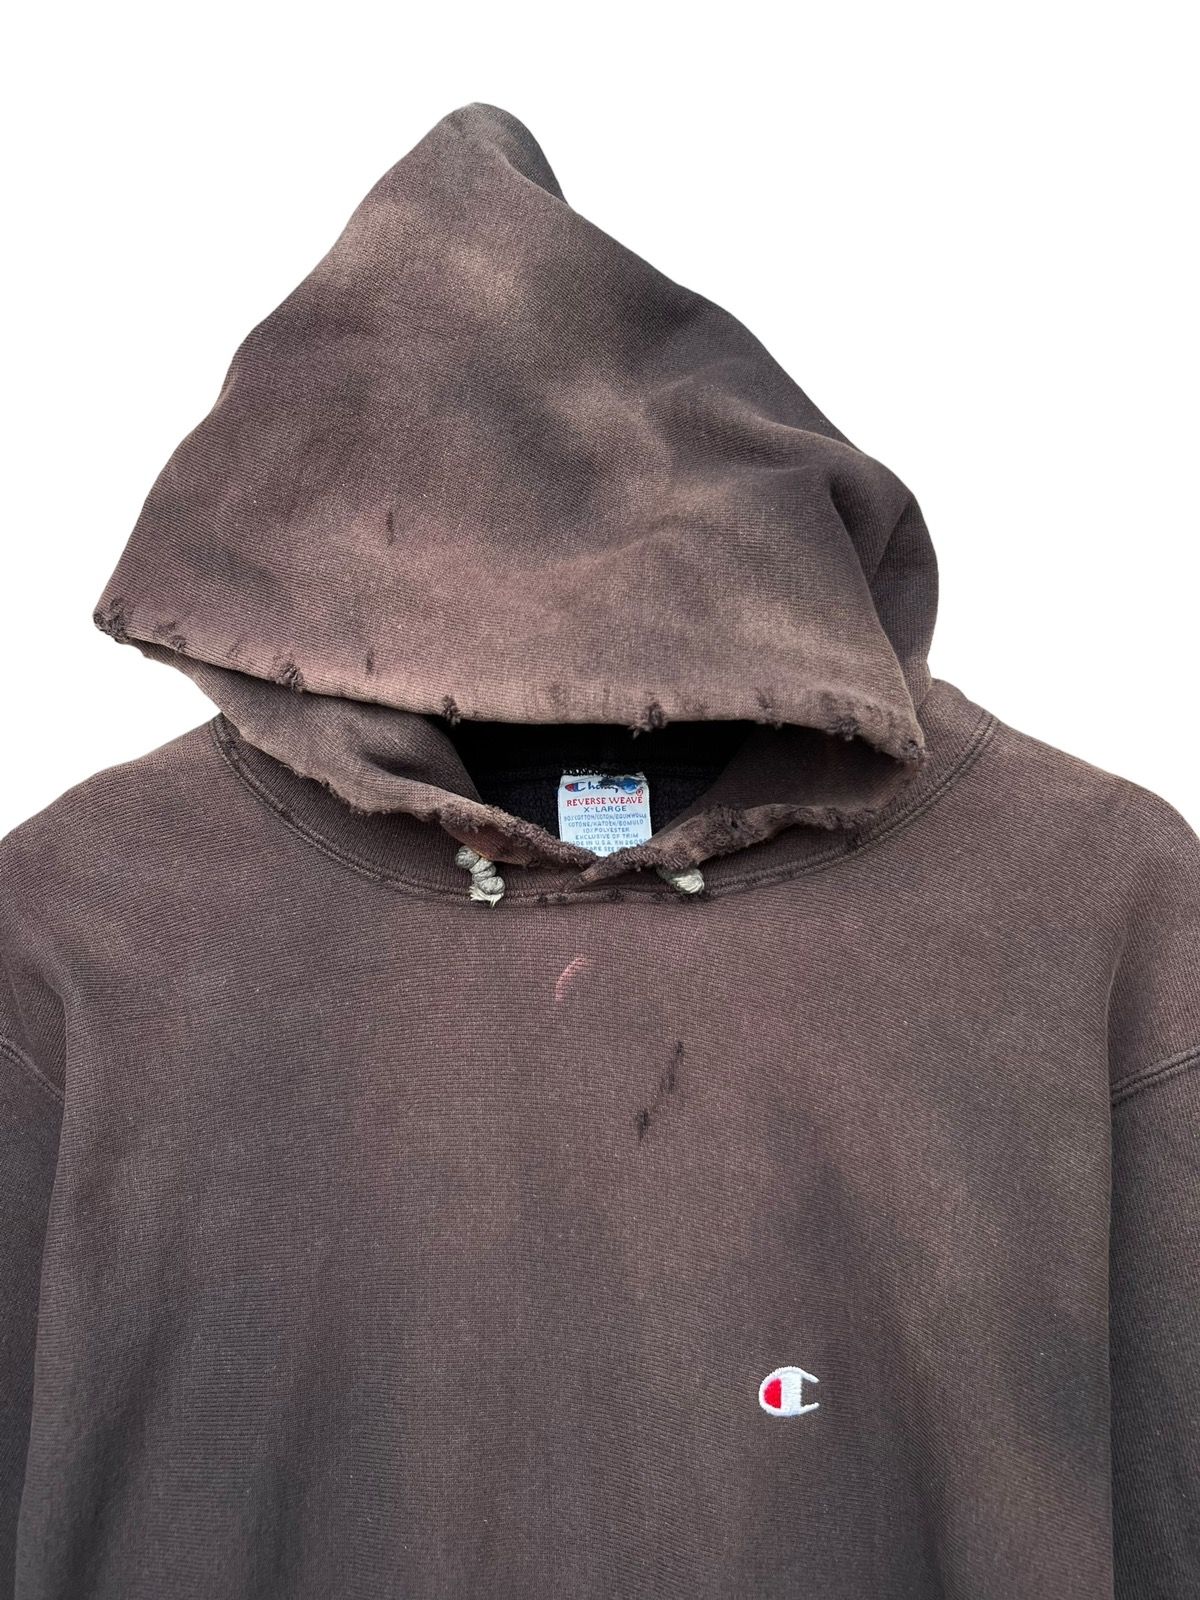 Vtg 90s Champion Reverse Weave Distressed Sunfaded Hoodie - 4